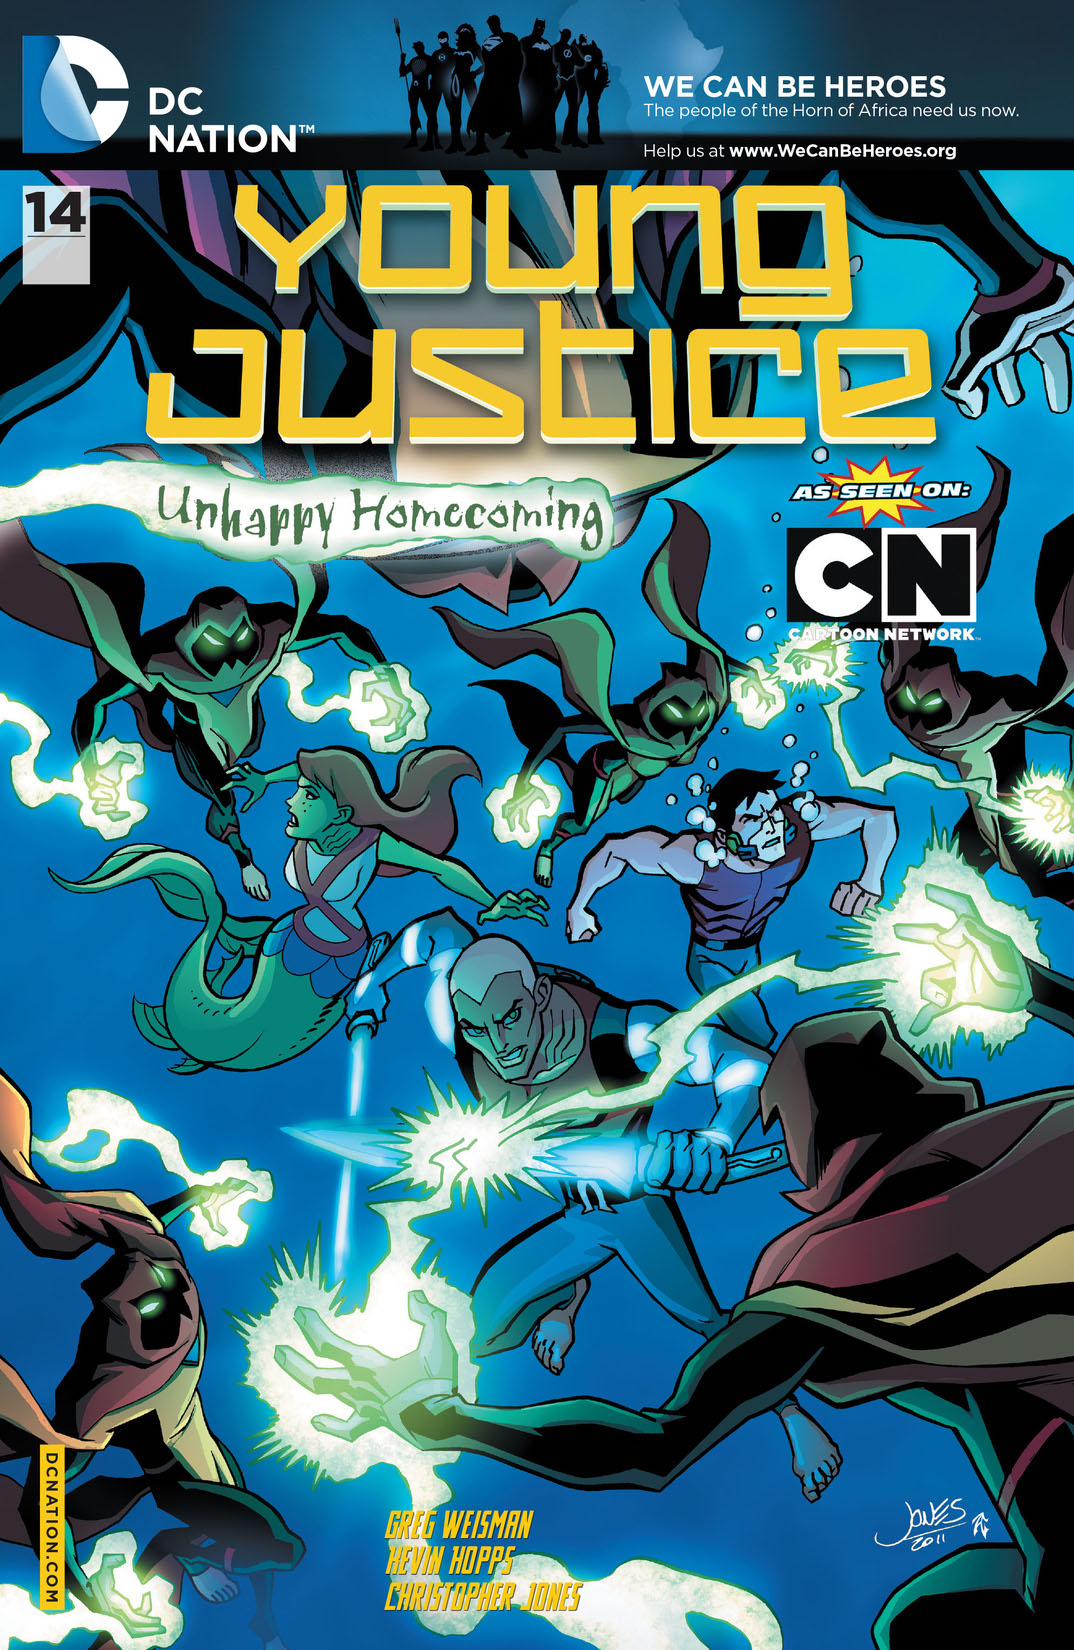 Young Justice (2011-2013) #14 preview images